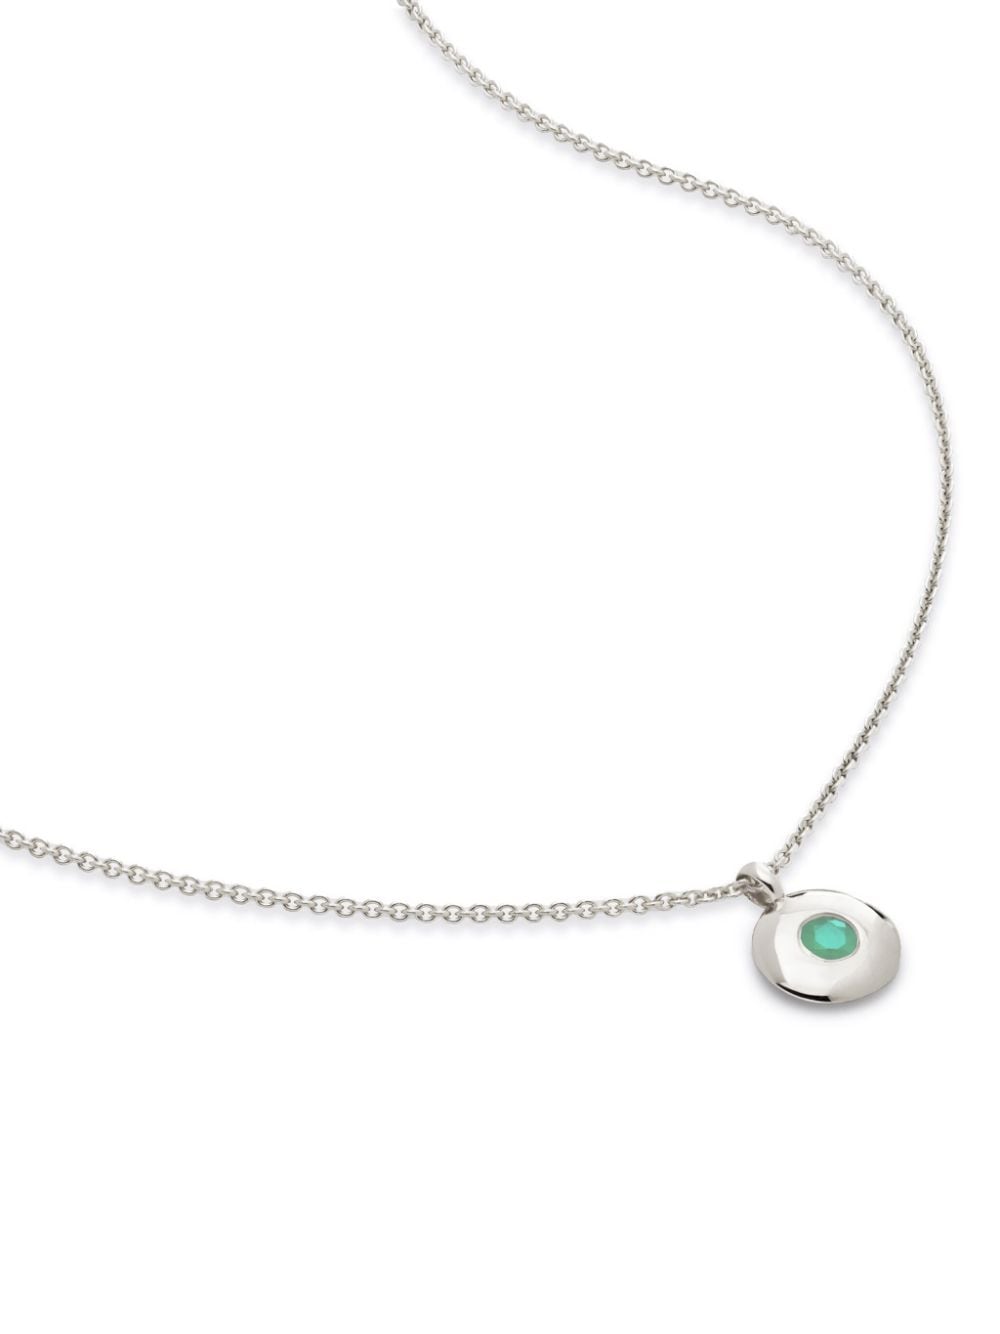 May emerald pendant necklace